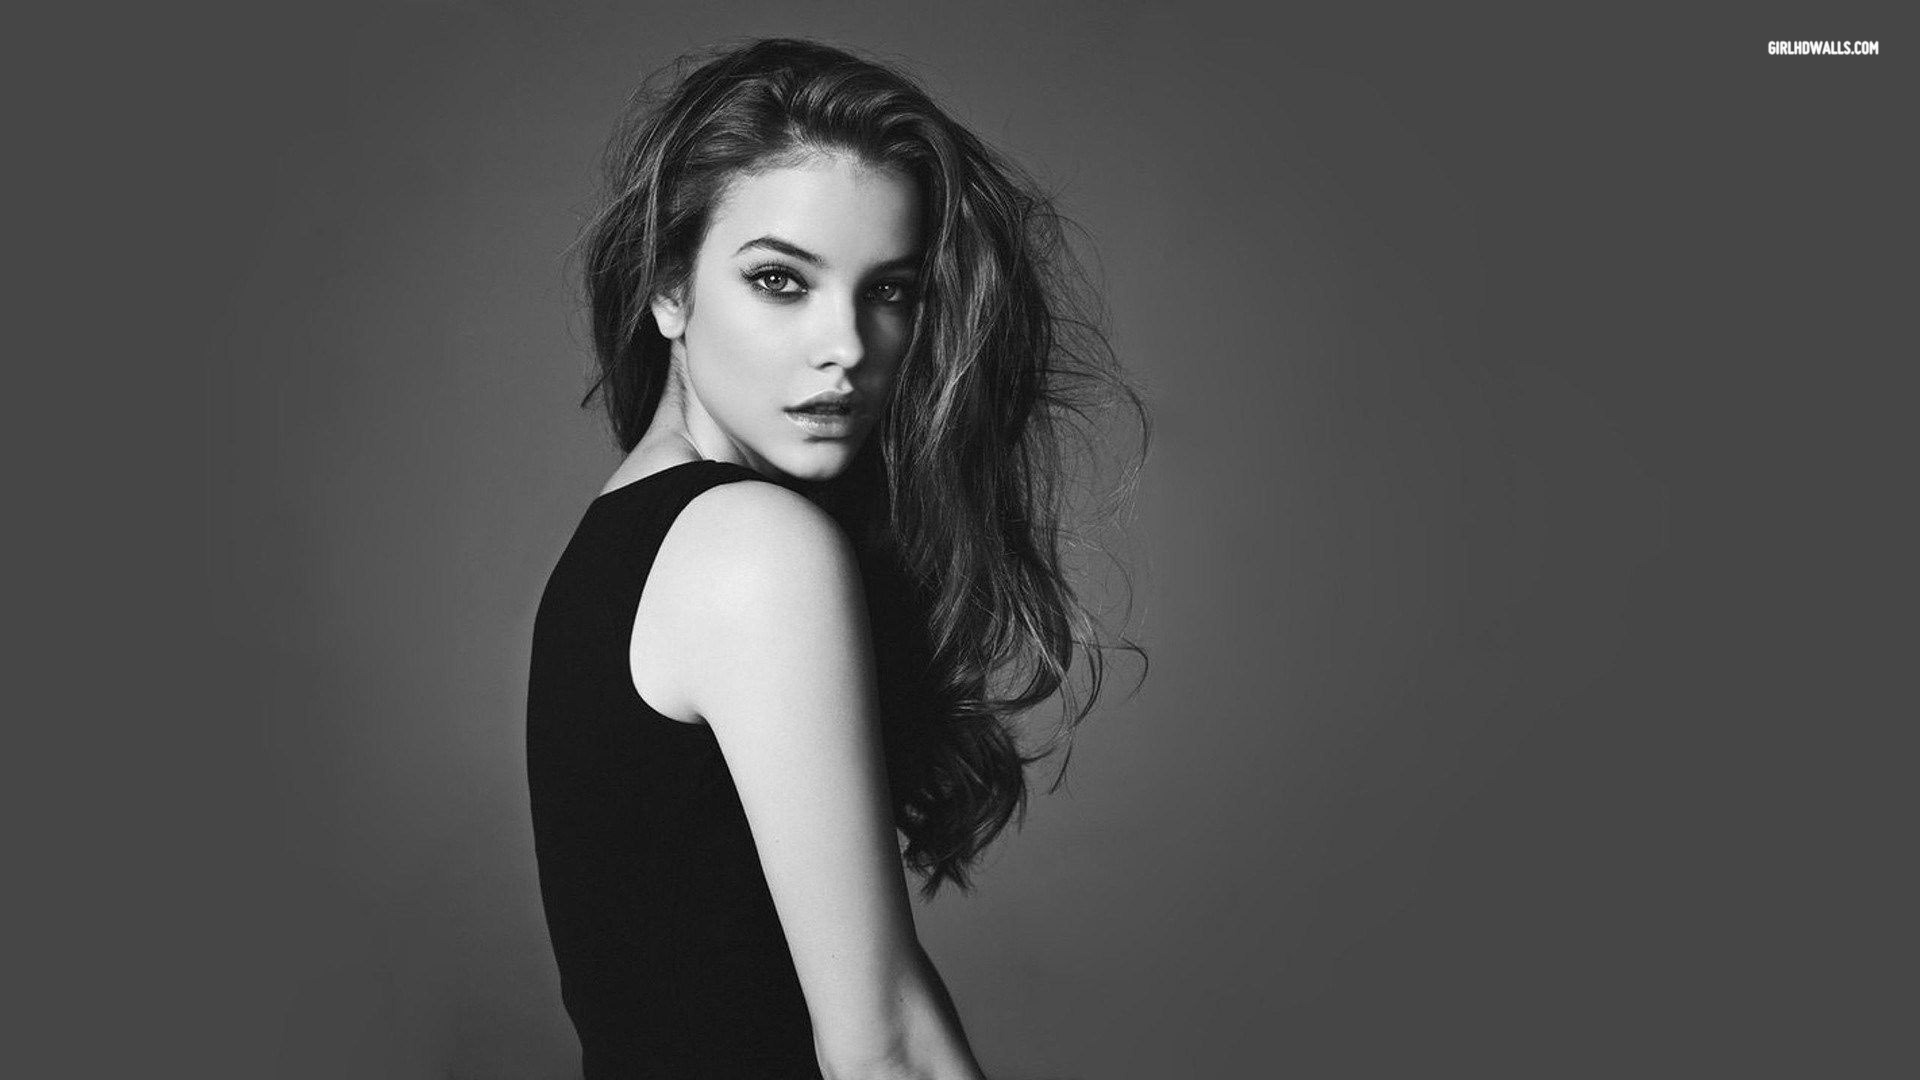 Barbara Palvin Wallpapers Images Photos Pictures Backgrounds